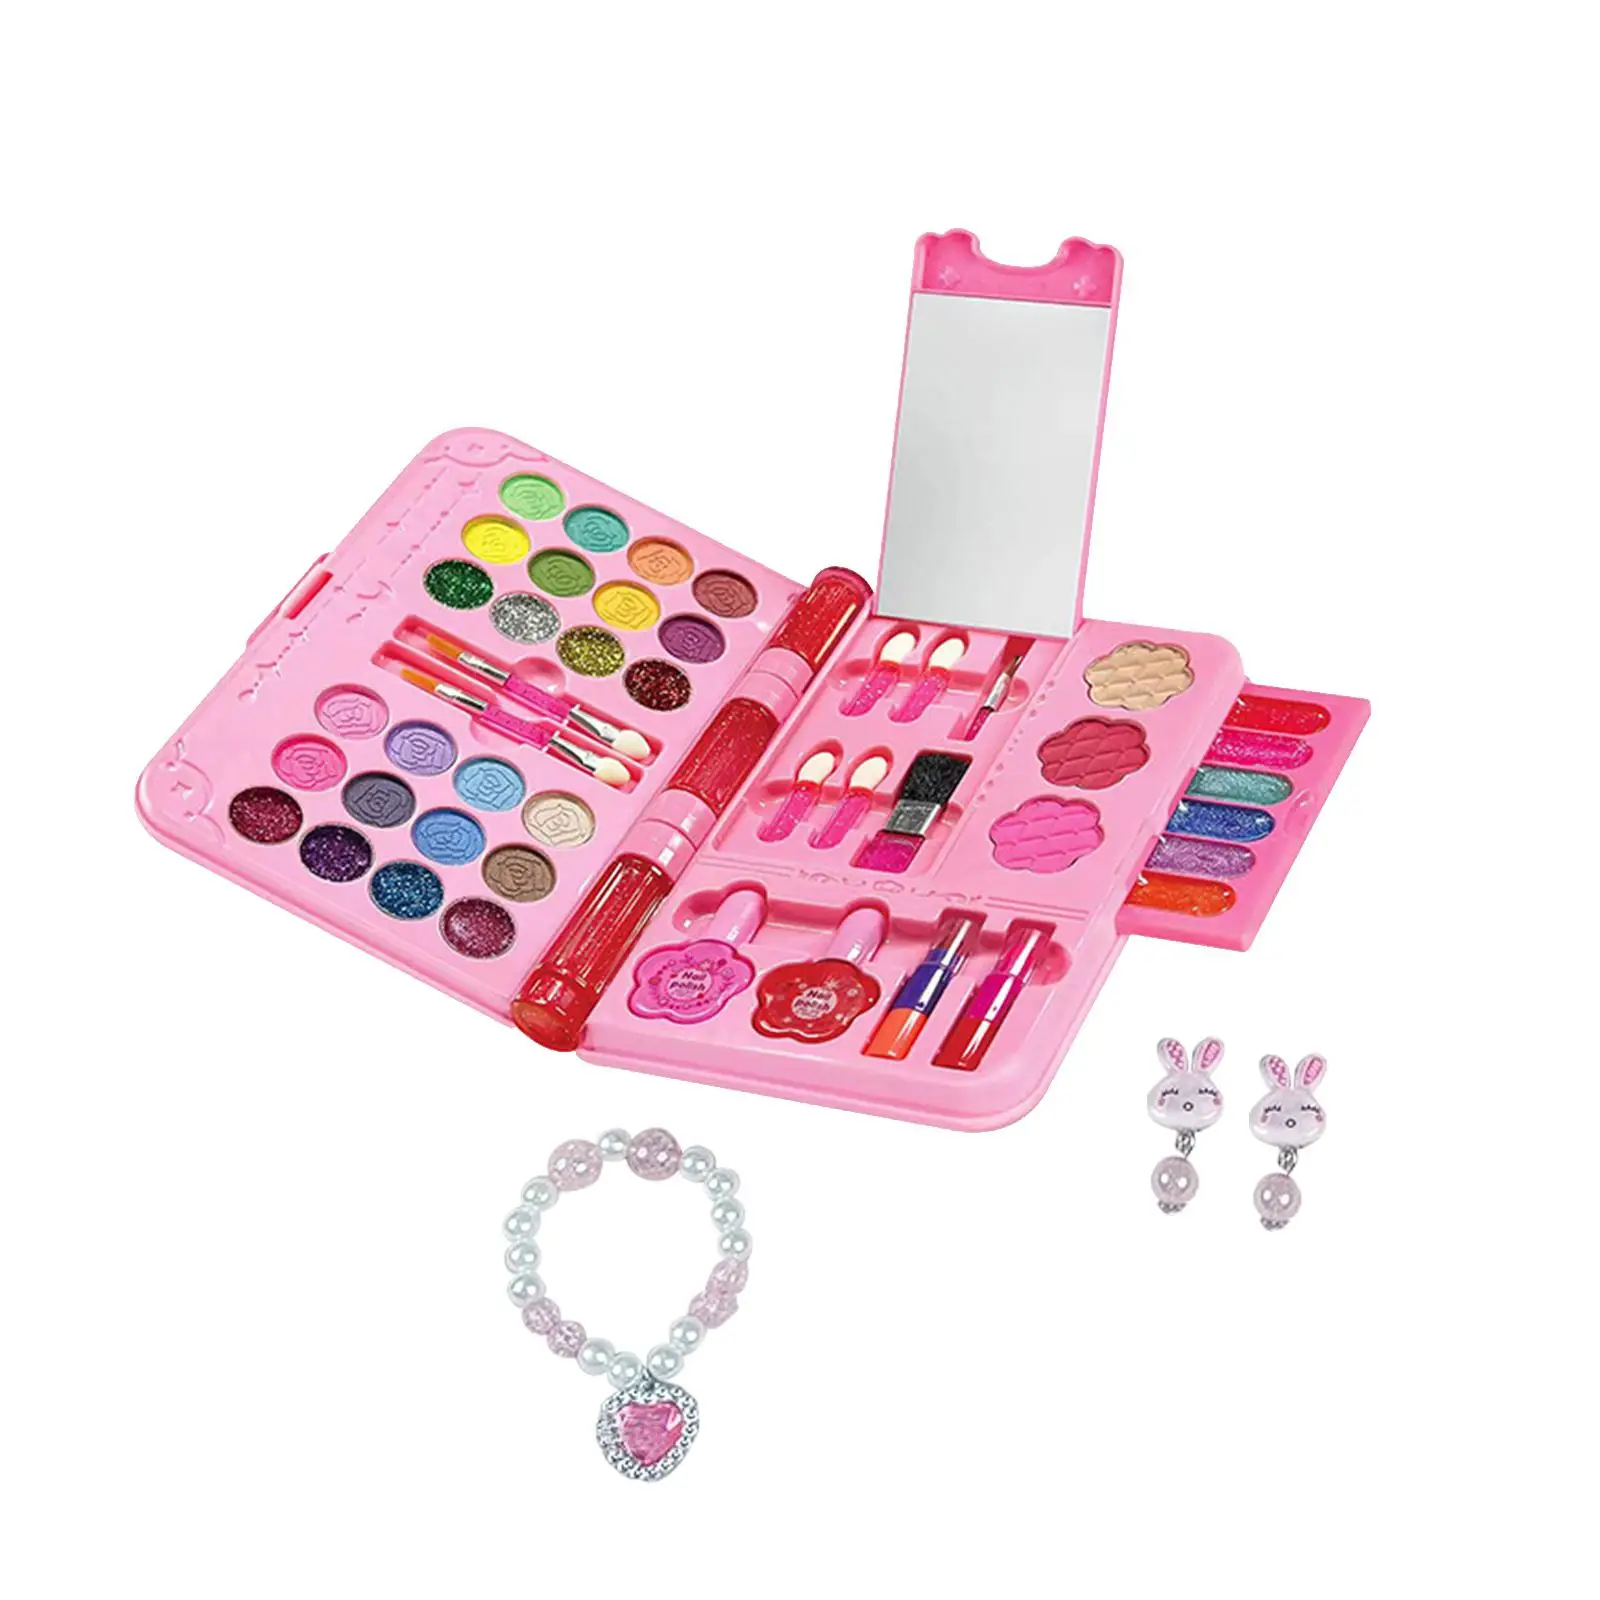 Children Makeup Playing Box, Cosmetics Makeup Toy Playset, Makeup Vanity Toy, Portable Pretend Play Makeup Toy Set for Toddlers